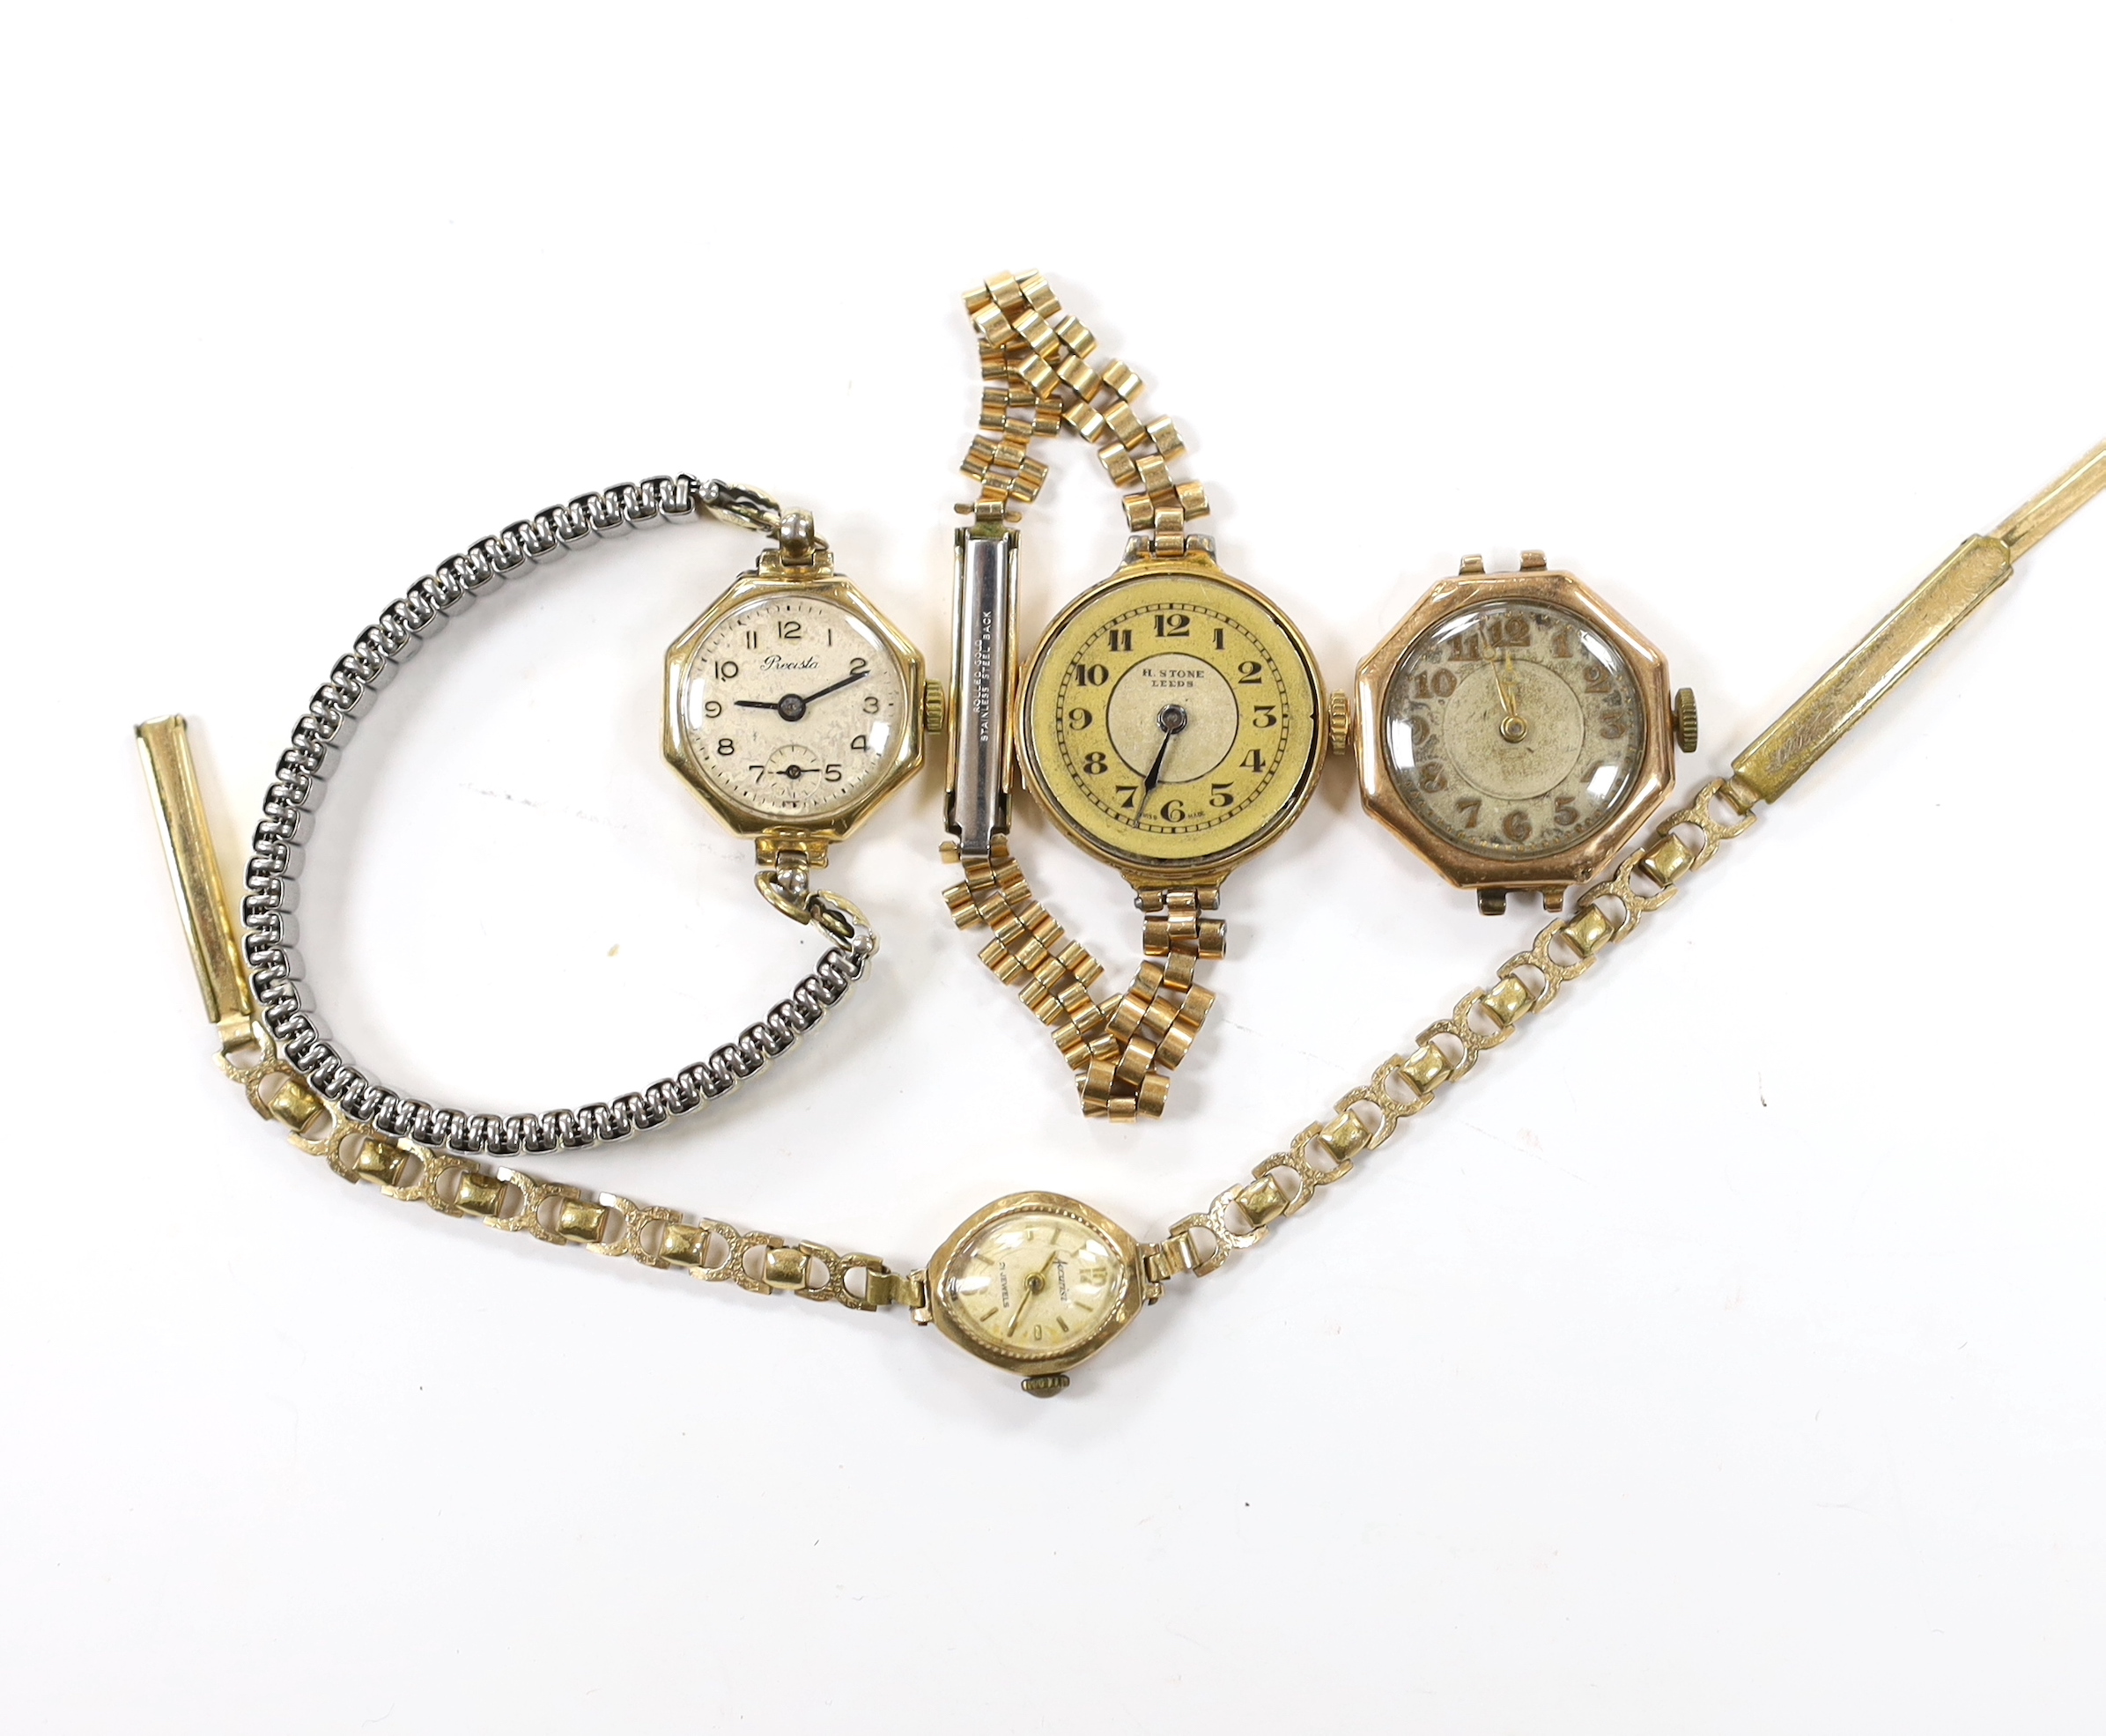 Four lady's assorted 9ct gold manual wind wrist watches, including Accurist and Precista, three on gold plated or rolled gold bracelets.